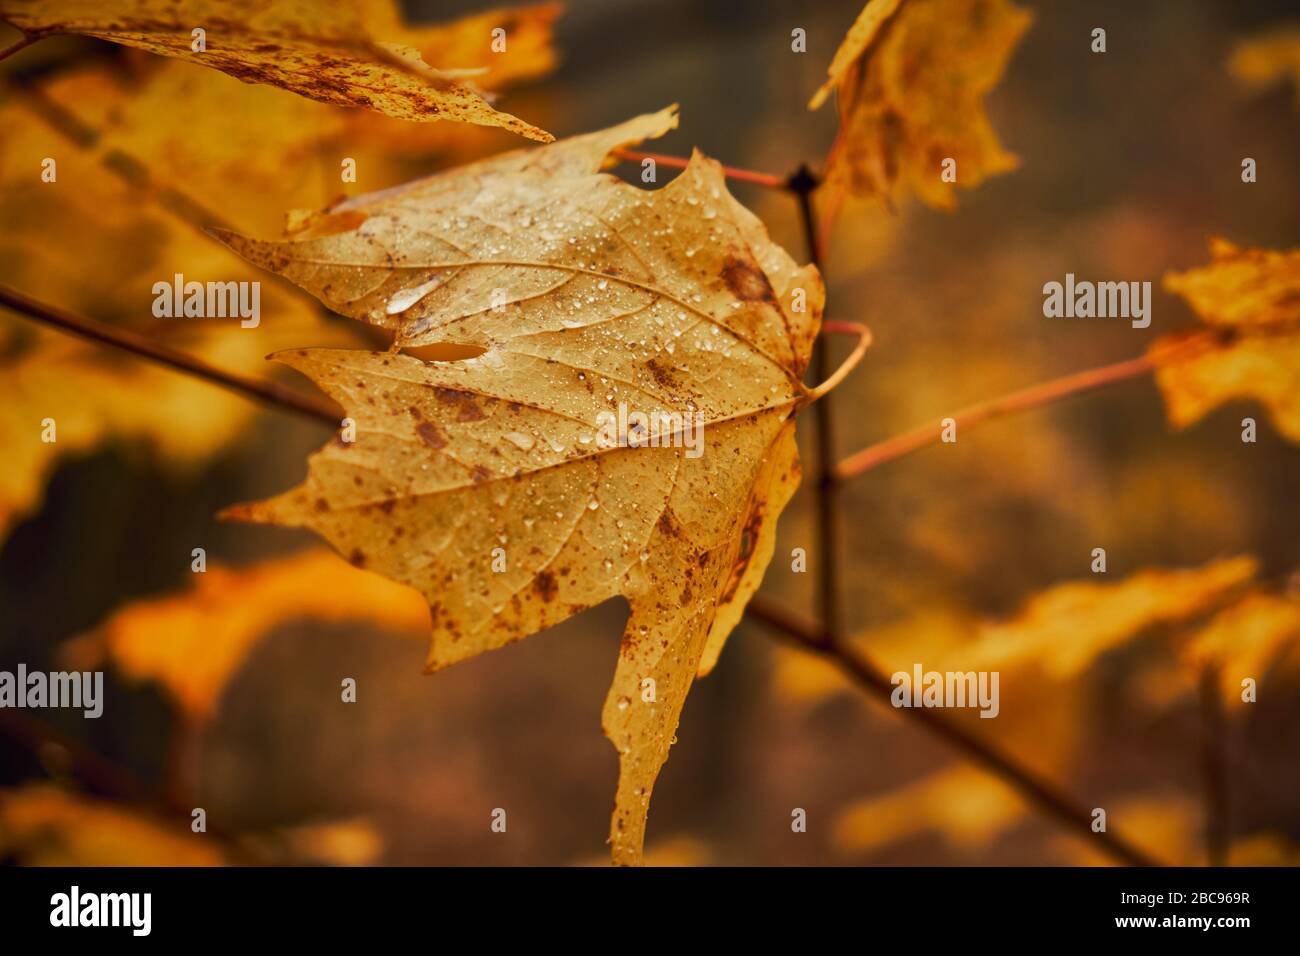 Photograph of maple leaf in autumn showing fall autumn yellow color with dry brown spots and rain drops after shower. Stock Photo